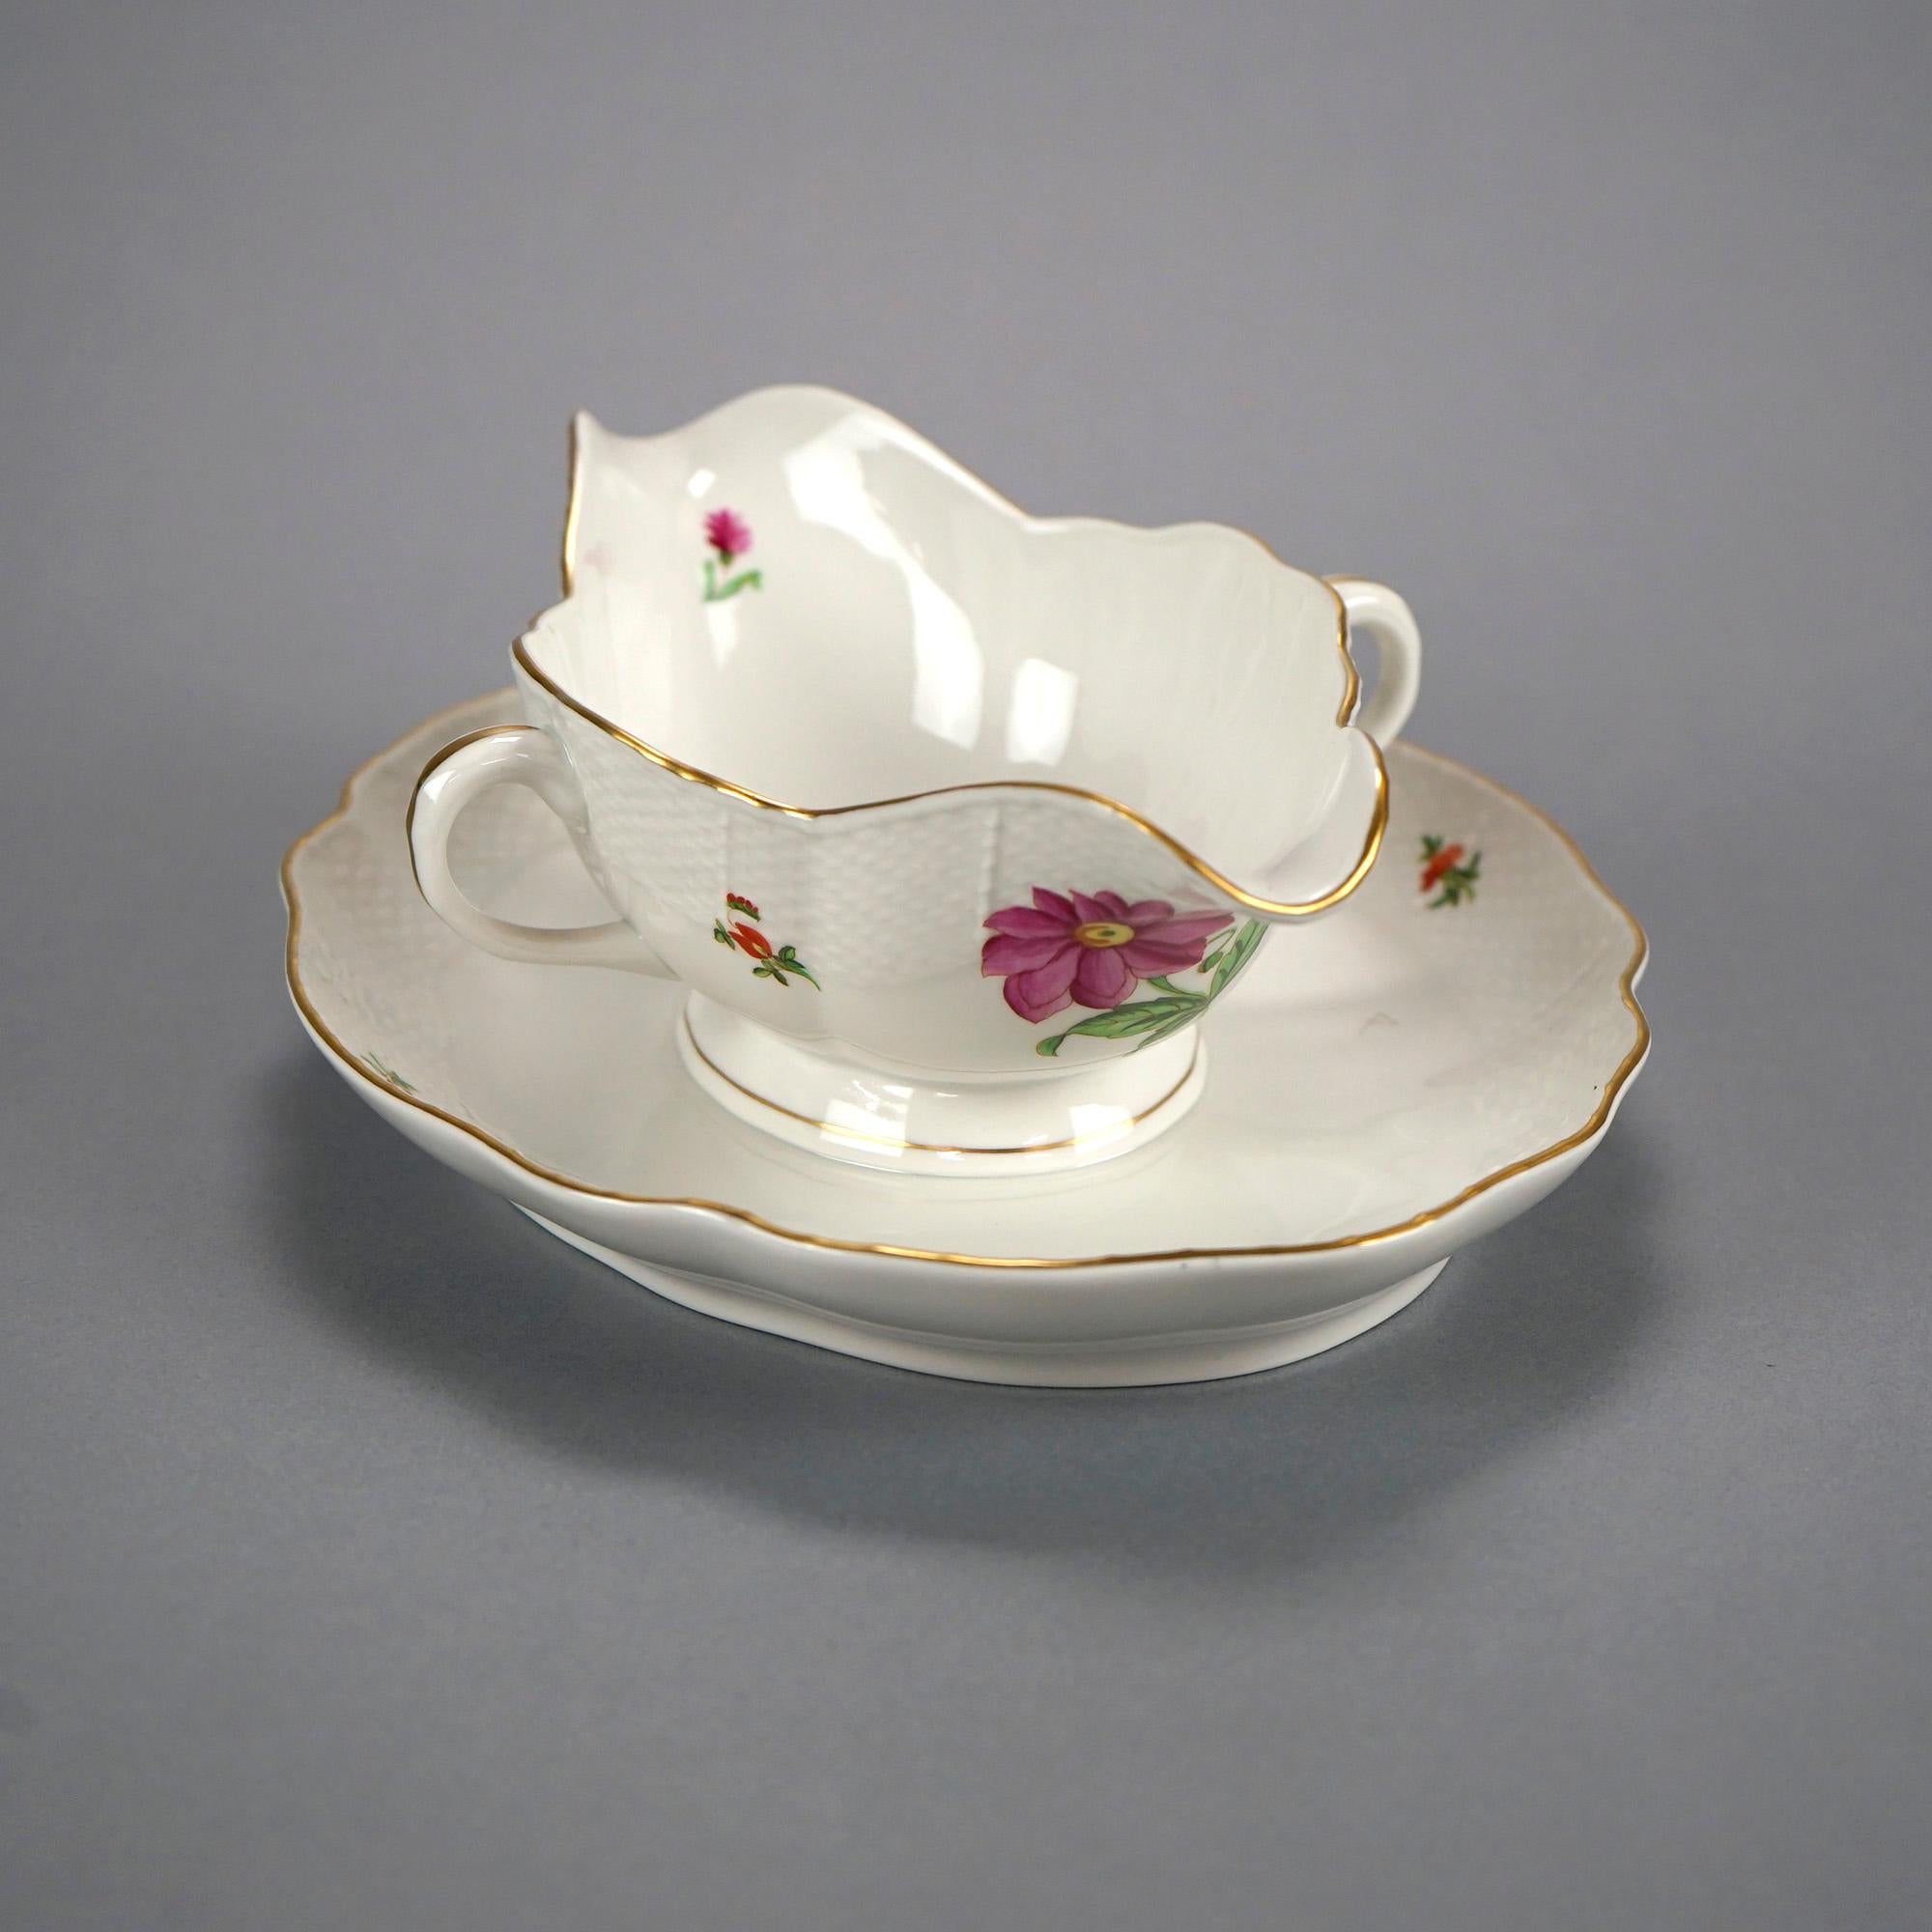 Herend Porcelain Double Handled Gravy Sauce Boat with Painted Flowers, 20th C For Sale 1